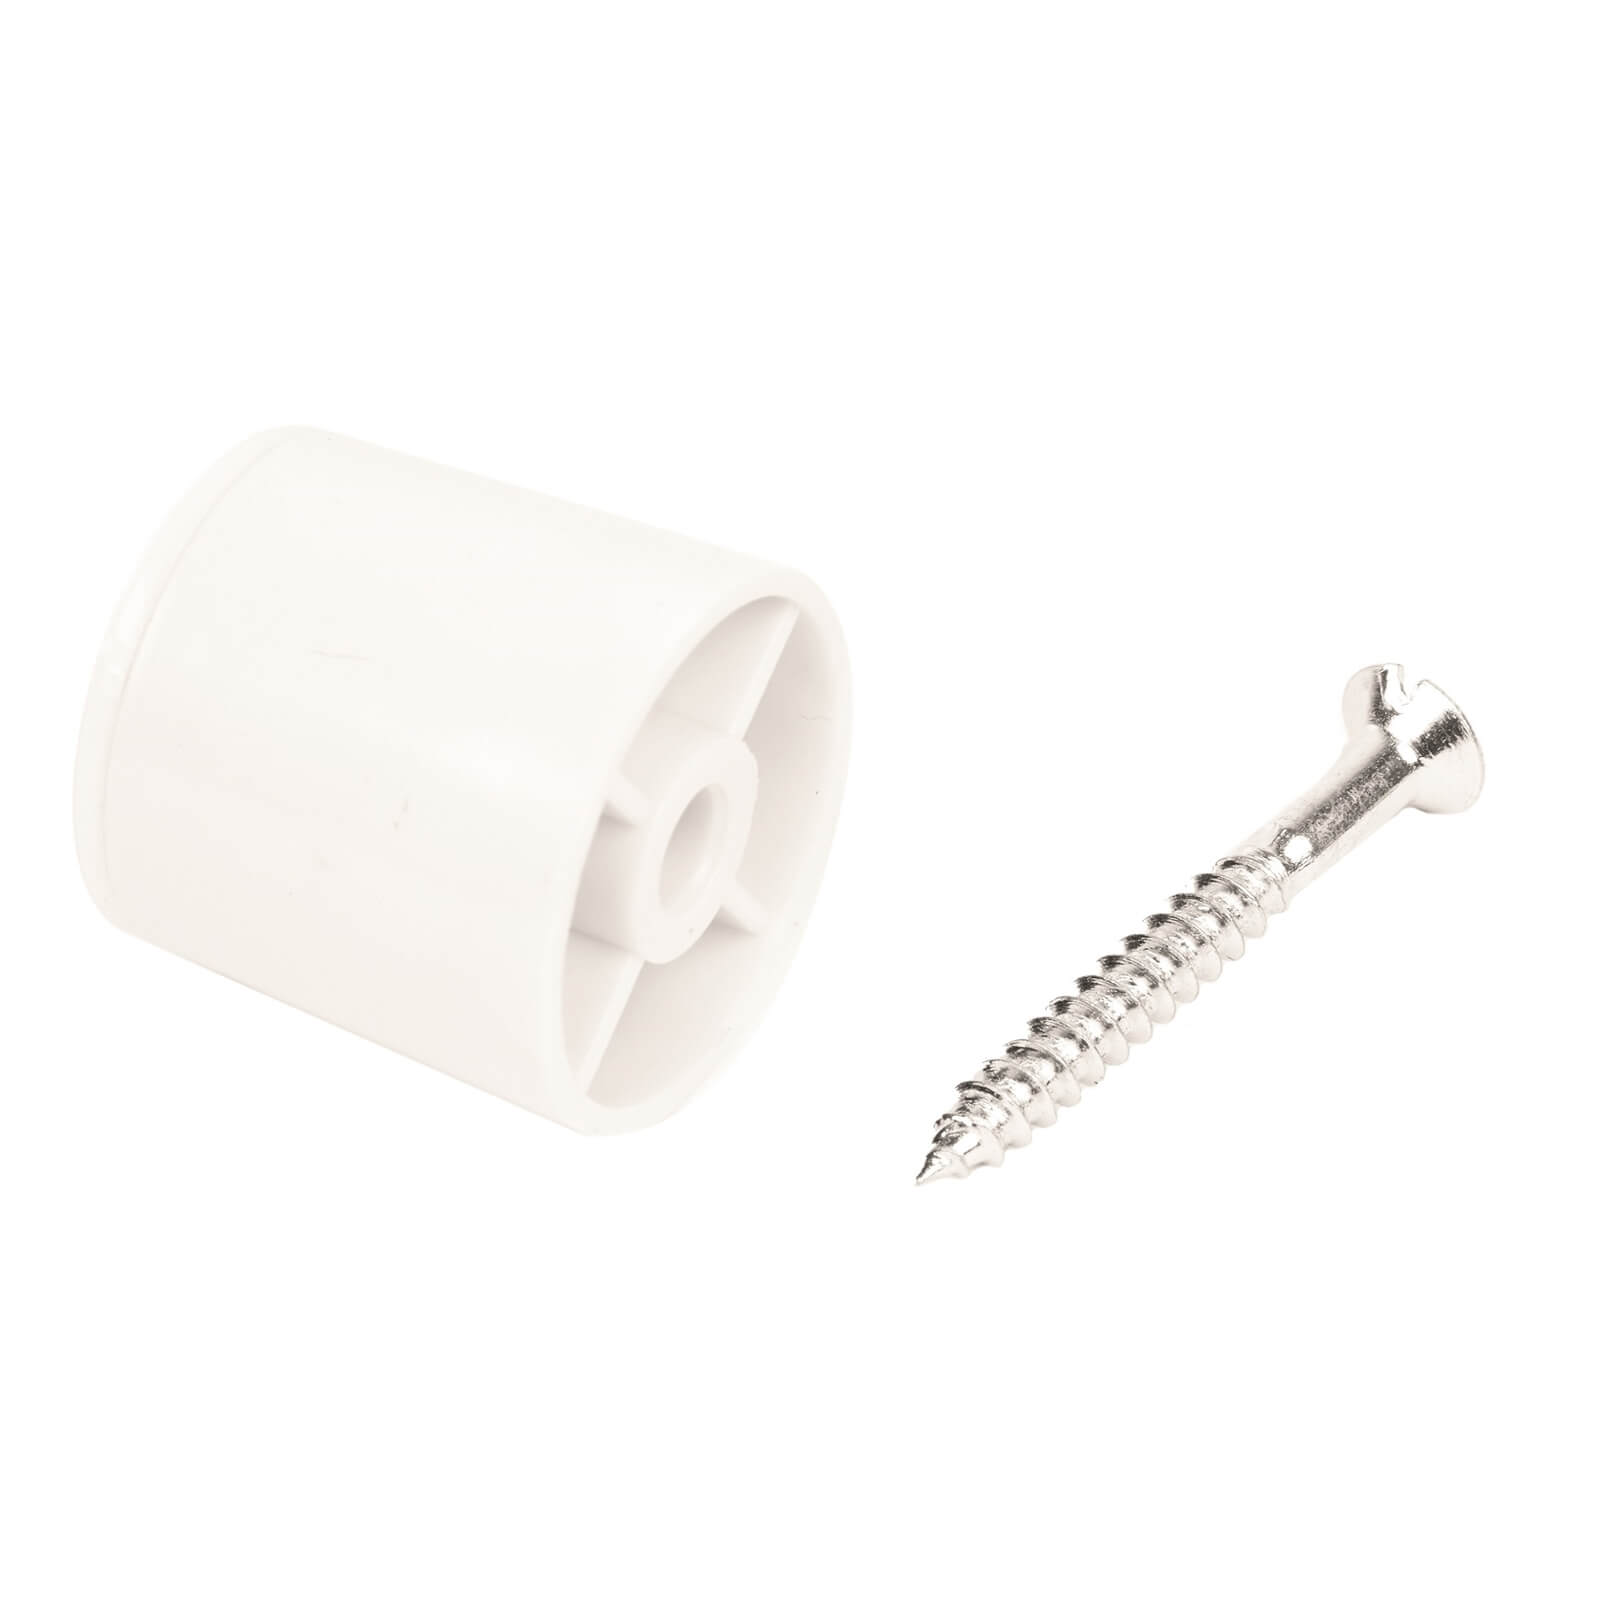 Photo of Concealed Door Stop - White - 2 Pack